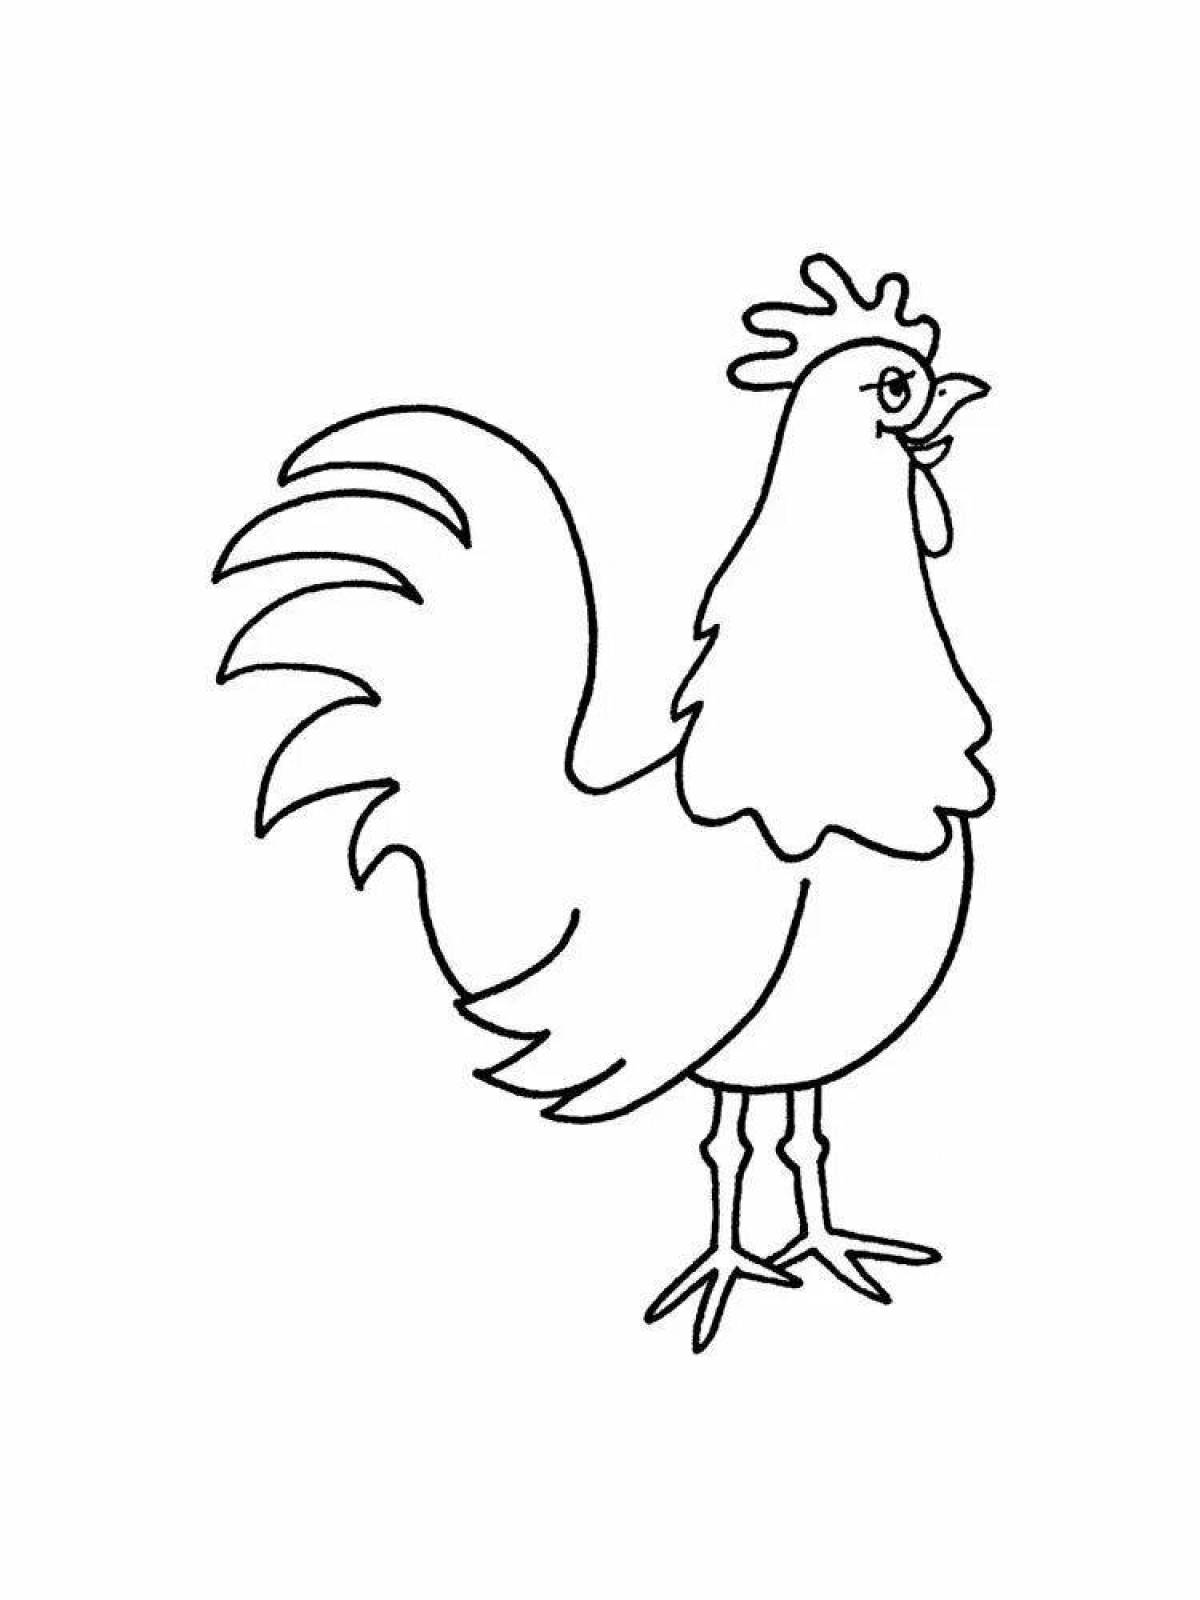 Coloring book witty rooster for kids